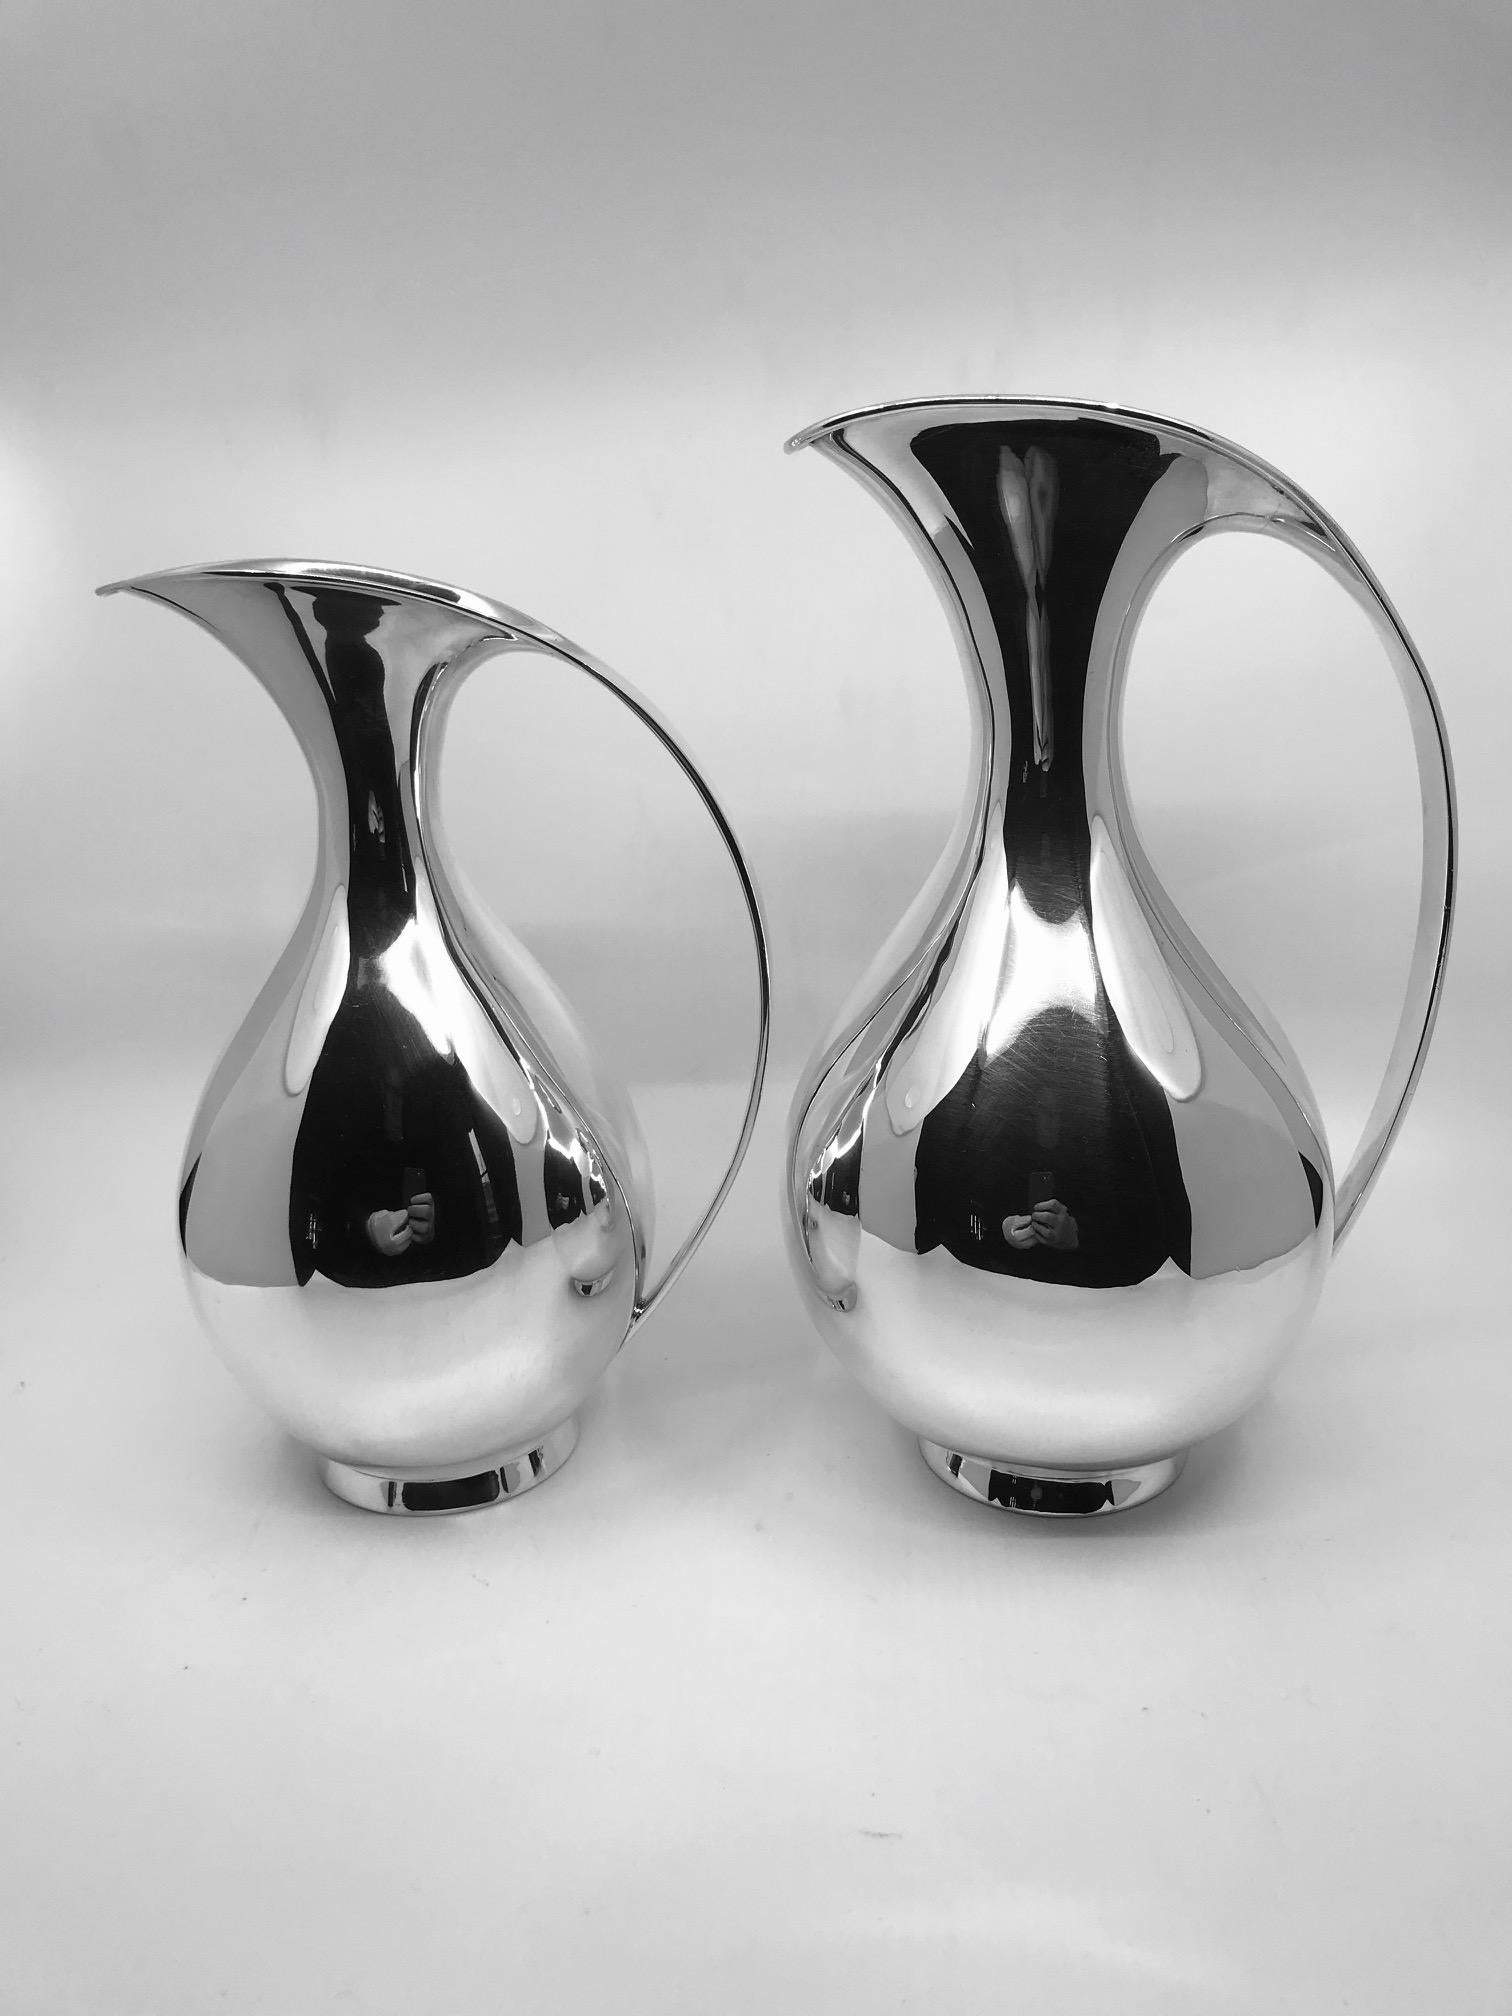 This is a pair of A. Michelsen sterling silver pitchers designed by Kay Fisker in 1935, from a private estate in London. Fisker designed two sizes of this pitcher, both are represented here and sold together. This design has been the forefront and